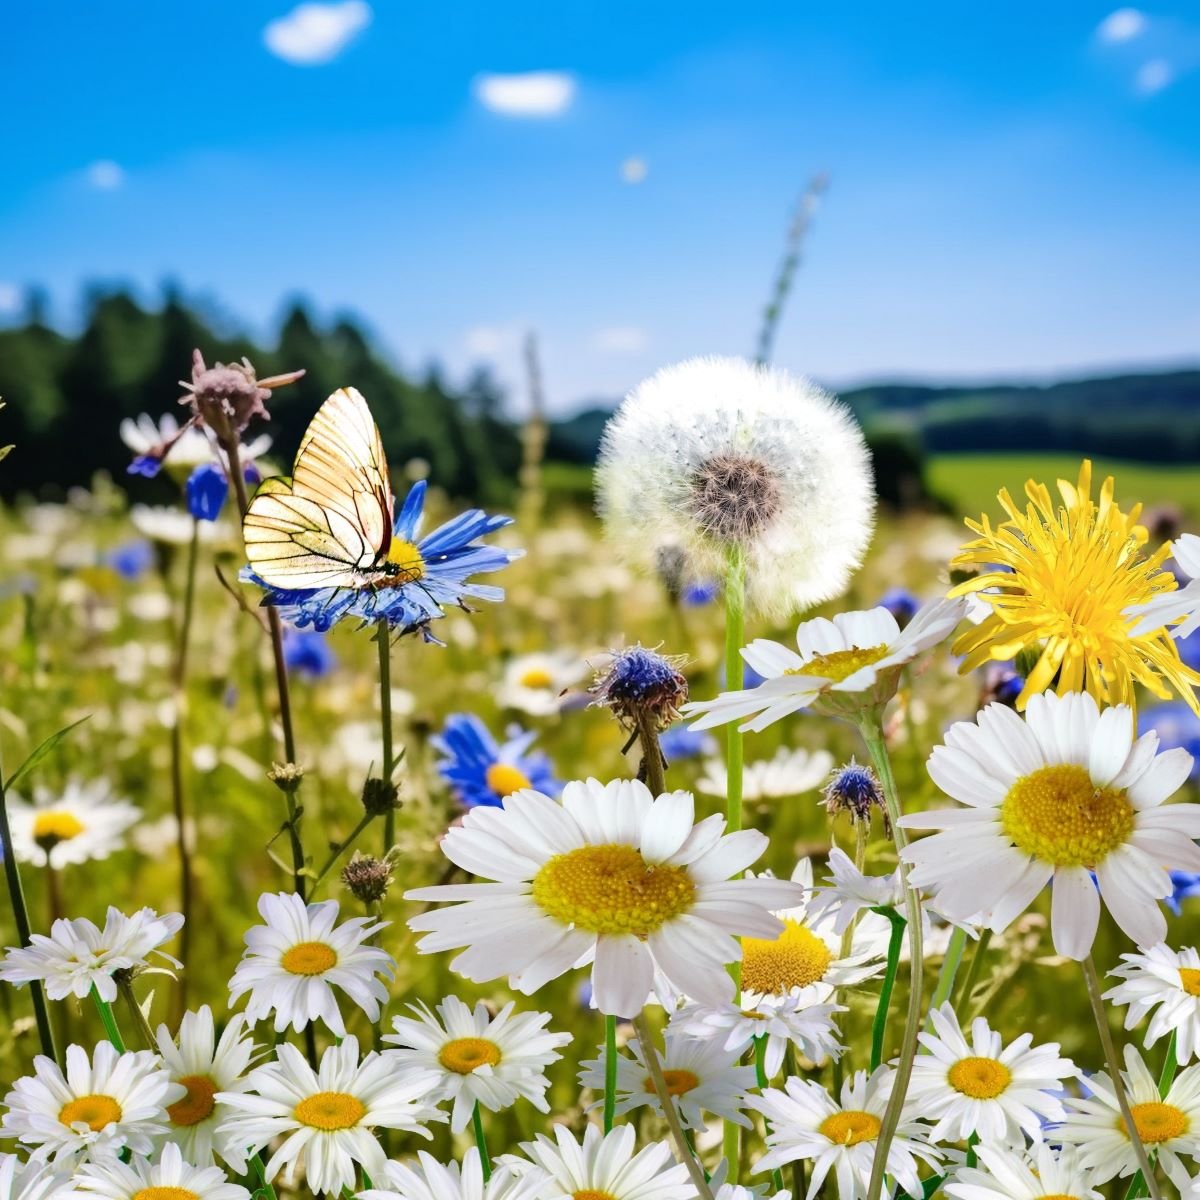 wildflowers_and_butterfly_sq_compressed.jpg